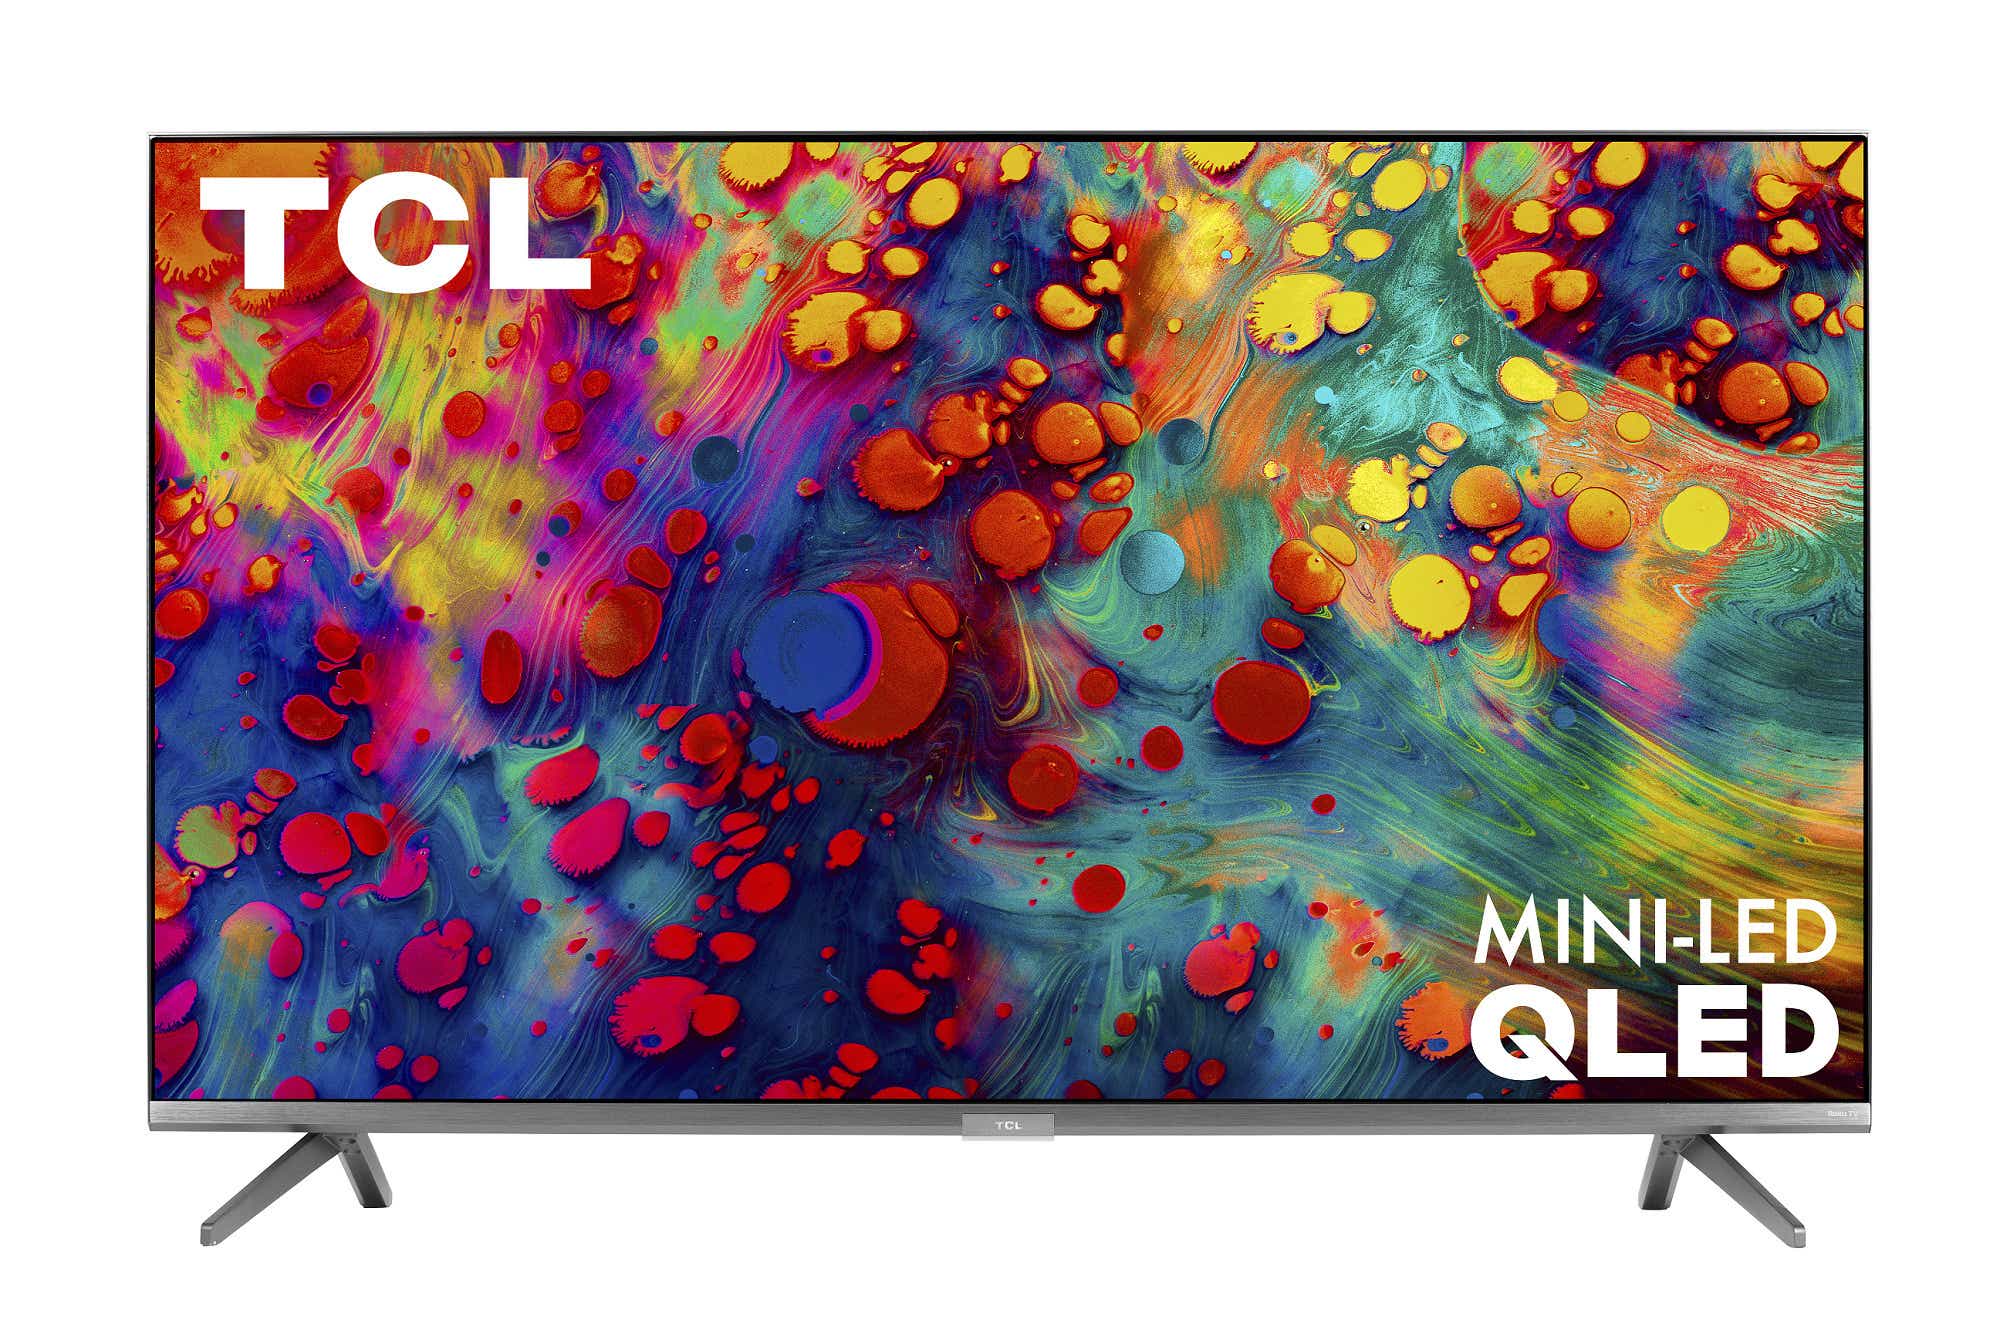 TCL 6-series 4K -- Best bang for the buck 4K TV